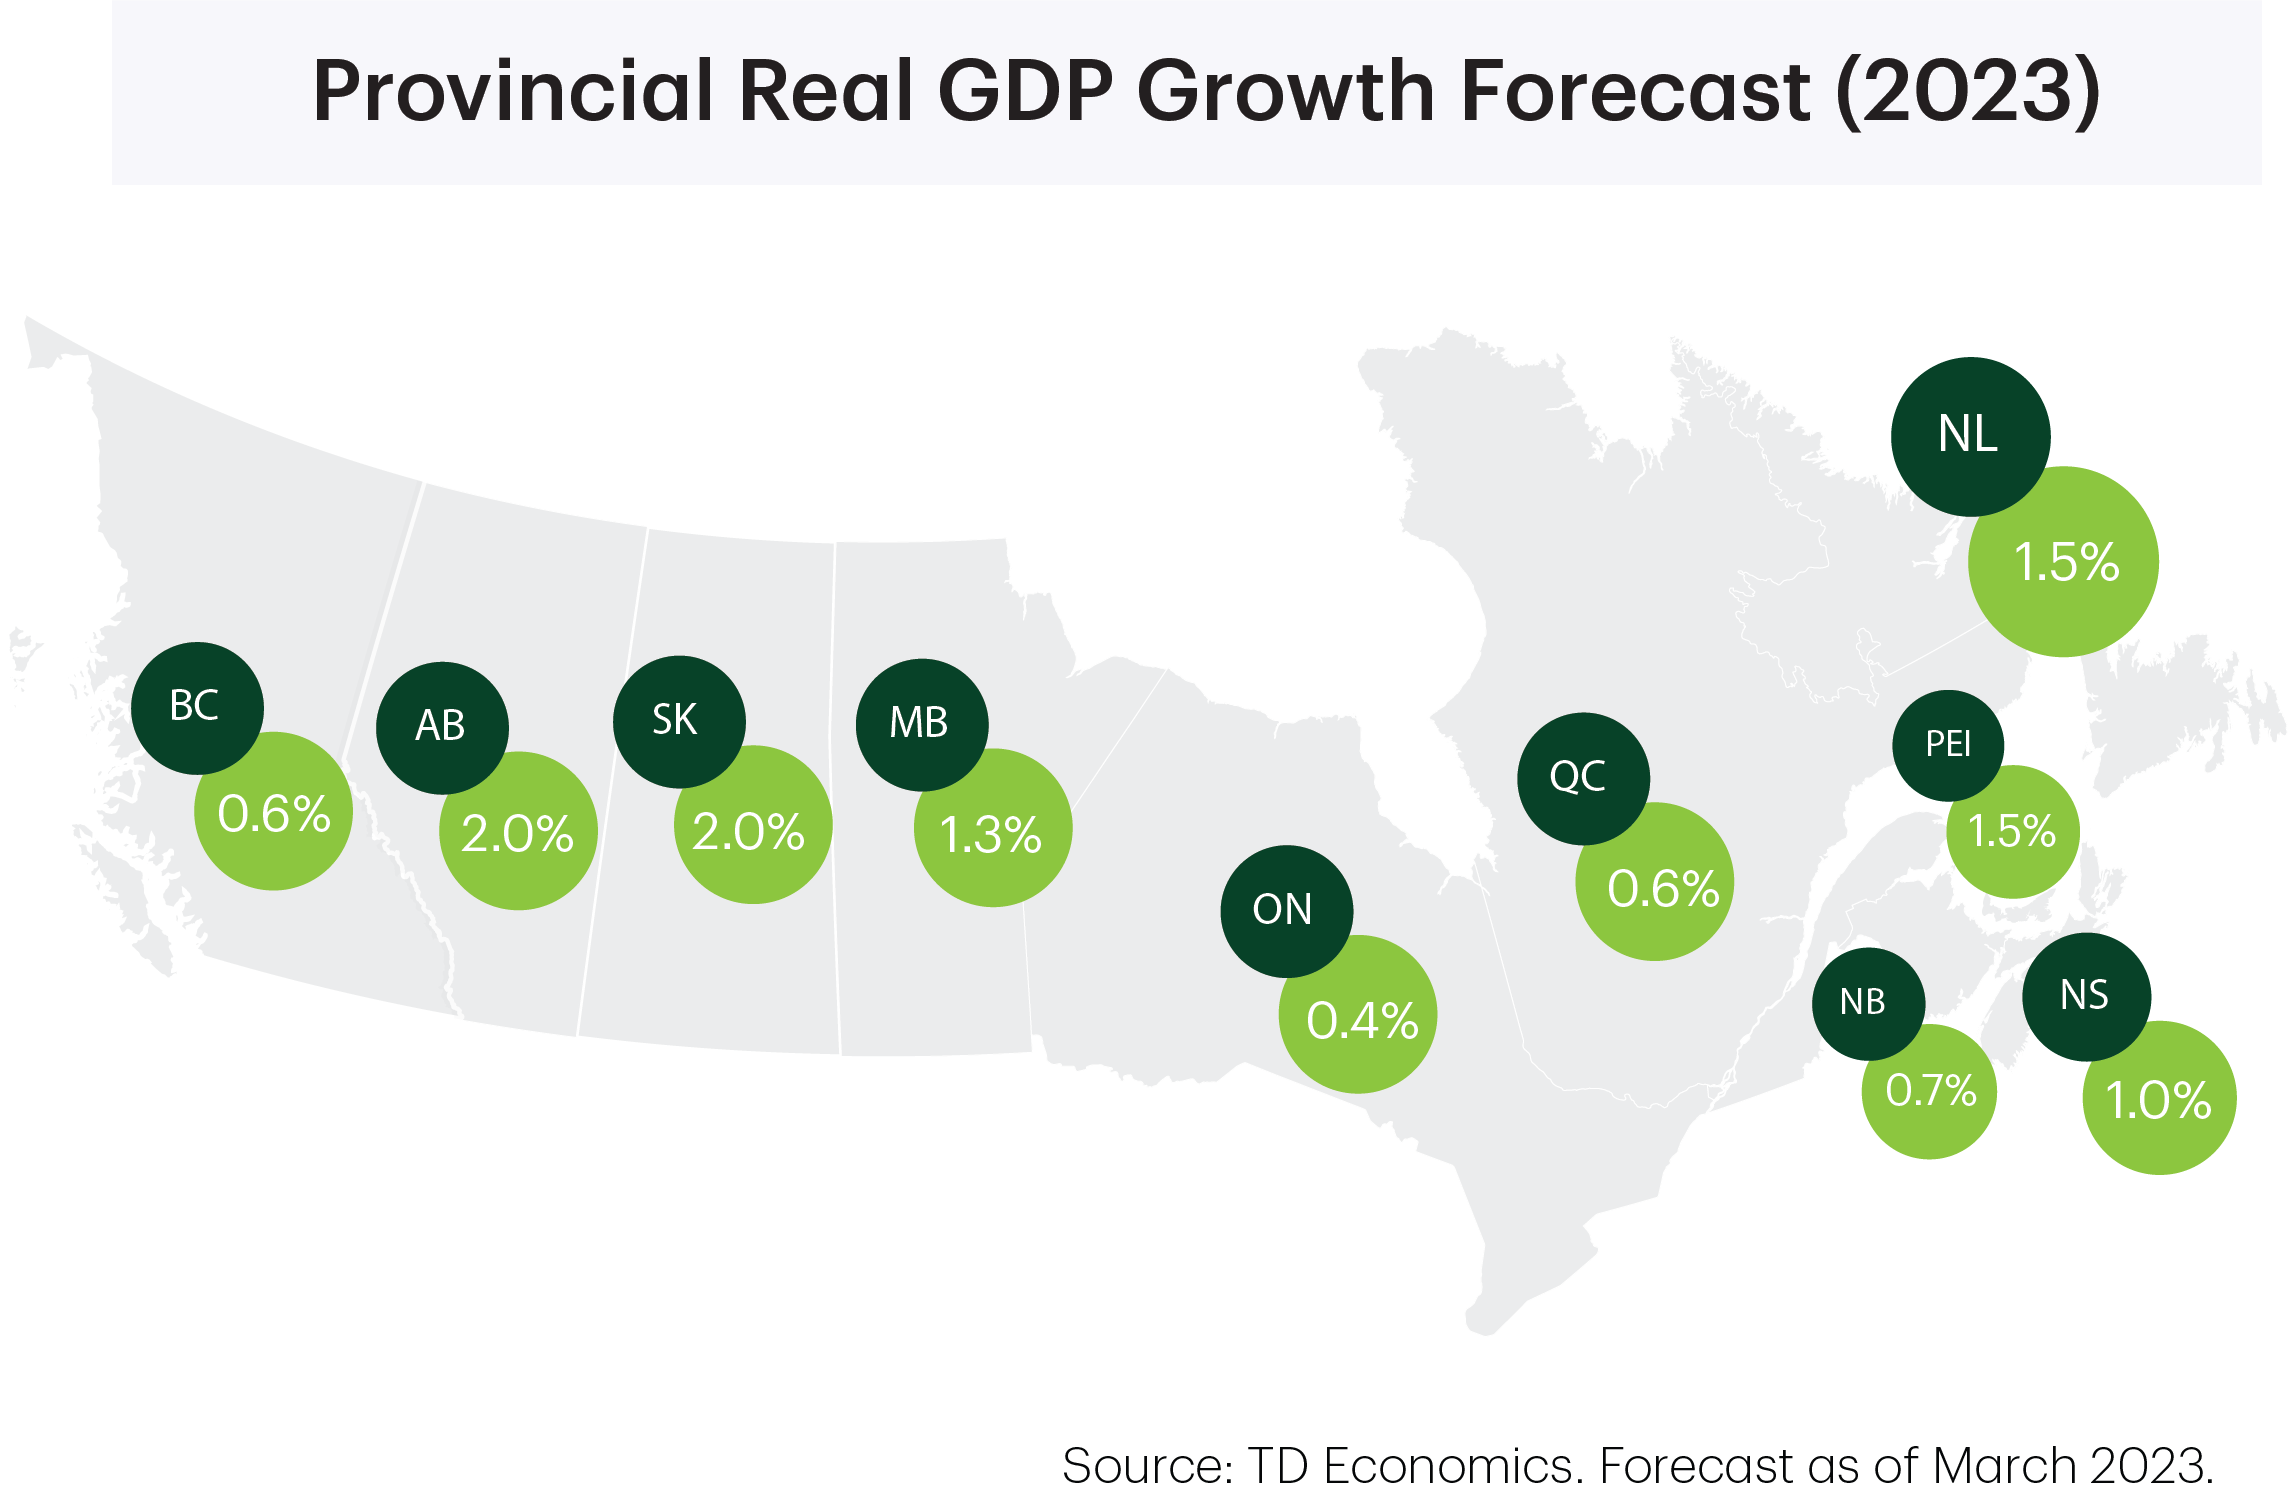 Provincial Real GDP Growth Forecast (2022)
        BC: 0.6%
        AB: 2.0%
        SK: 2.0%
        MB: 1.3%
        ON: 0.4%
        QC: 0.6%
        NB: 0.7%
        NS: 1.0%
        PEI: 1.5%
        NF: 1.5%
        